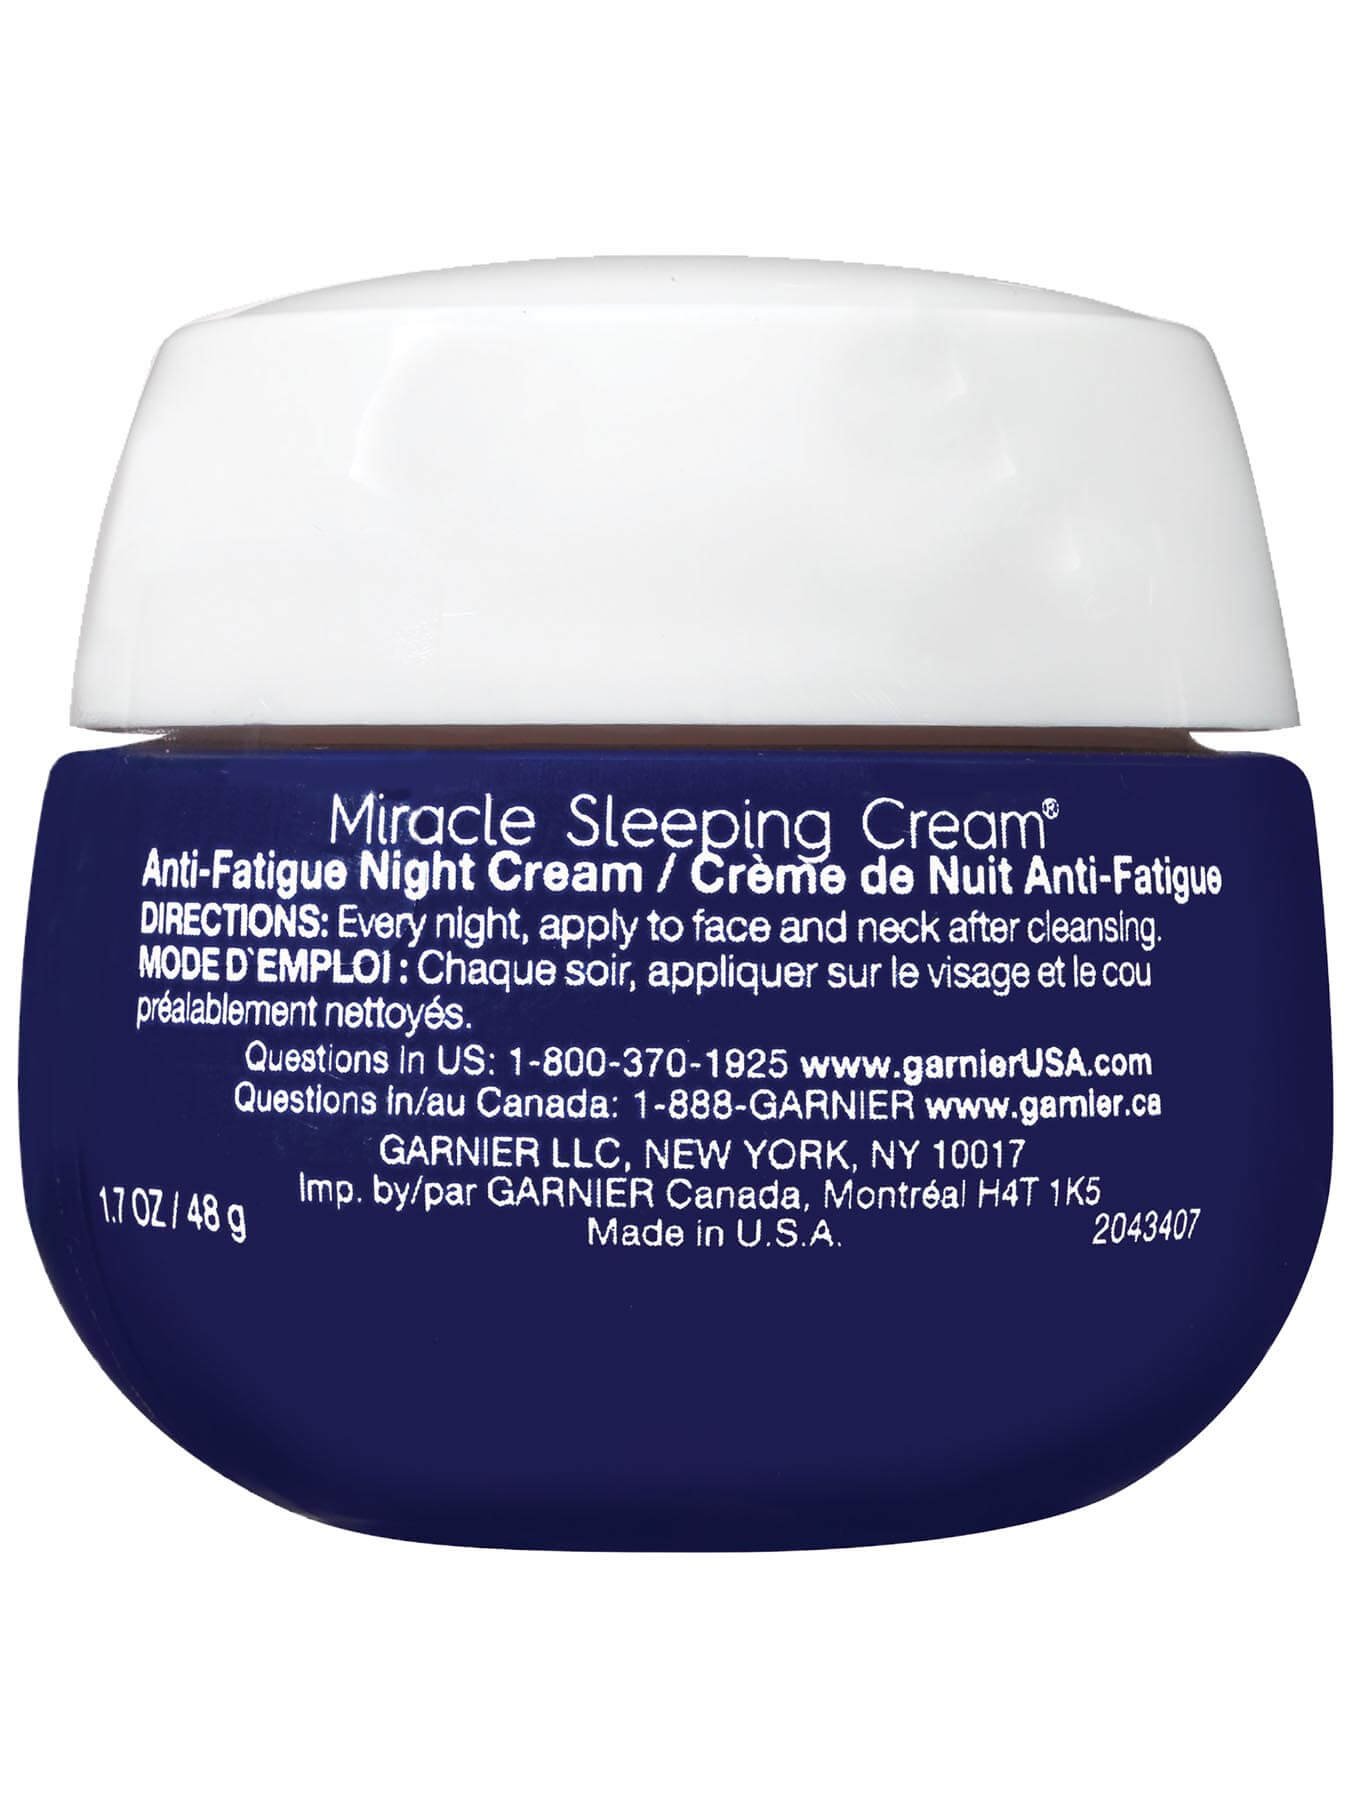 Back view of Ultra Lift Miracle Anti-Fatigue Sleeping Cream.